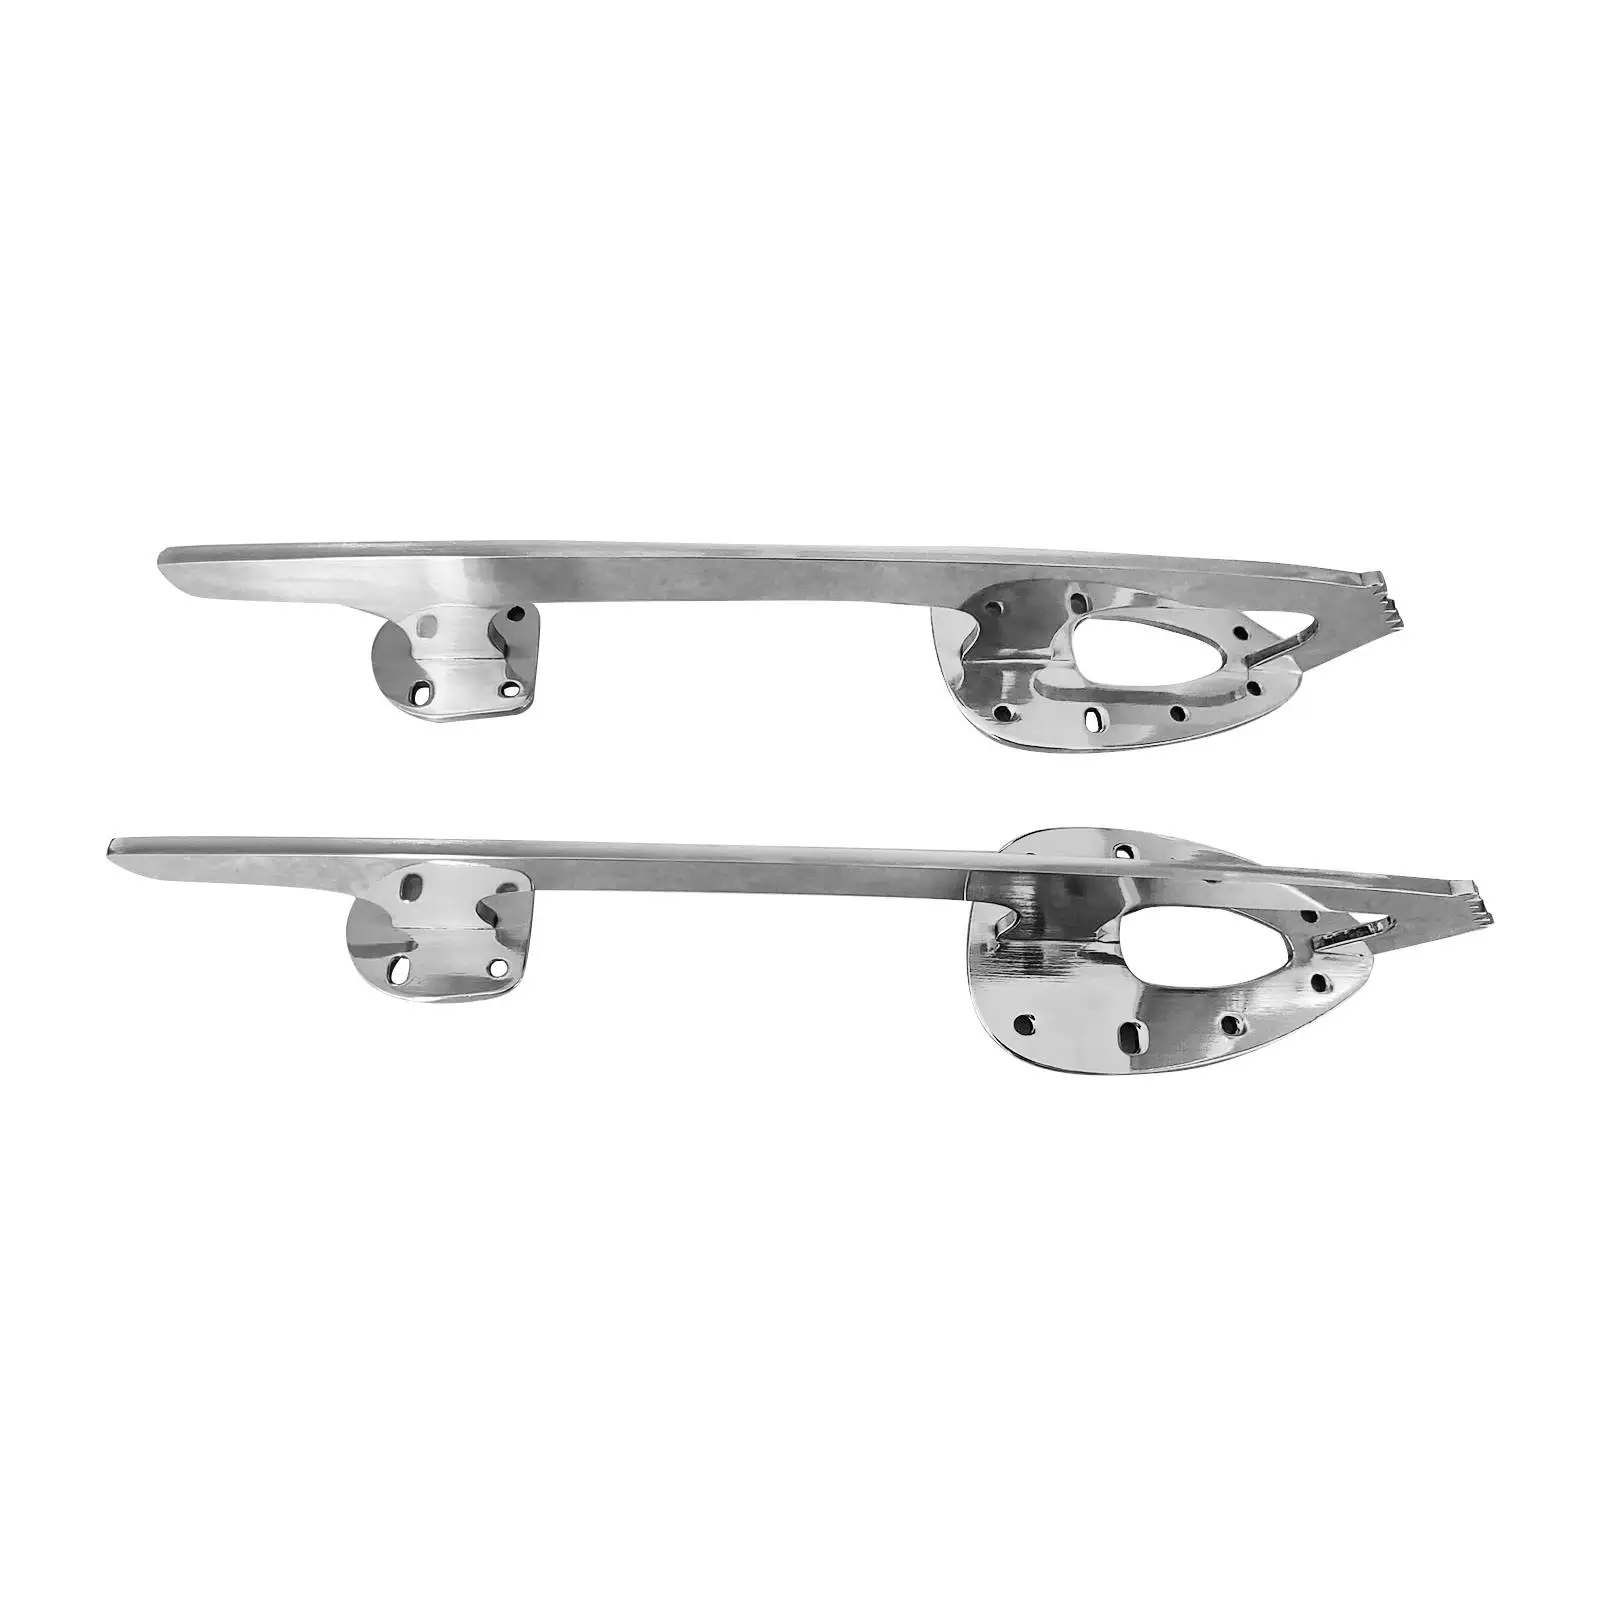 2 Pieces Skates Exercise Accessories 291mm Stable Stand Adult Ice Skating Blades Sport Accessories for Repairing Skating Hockey